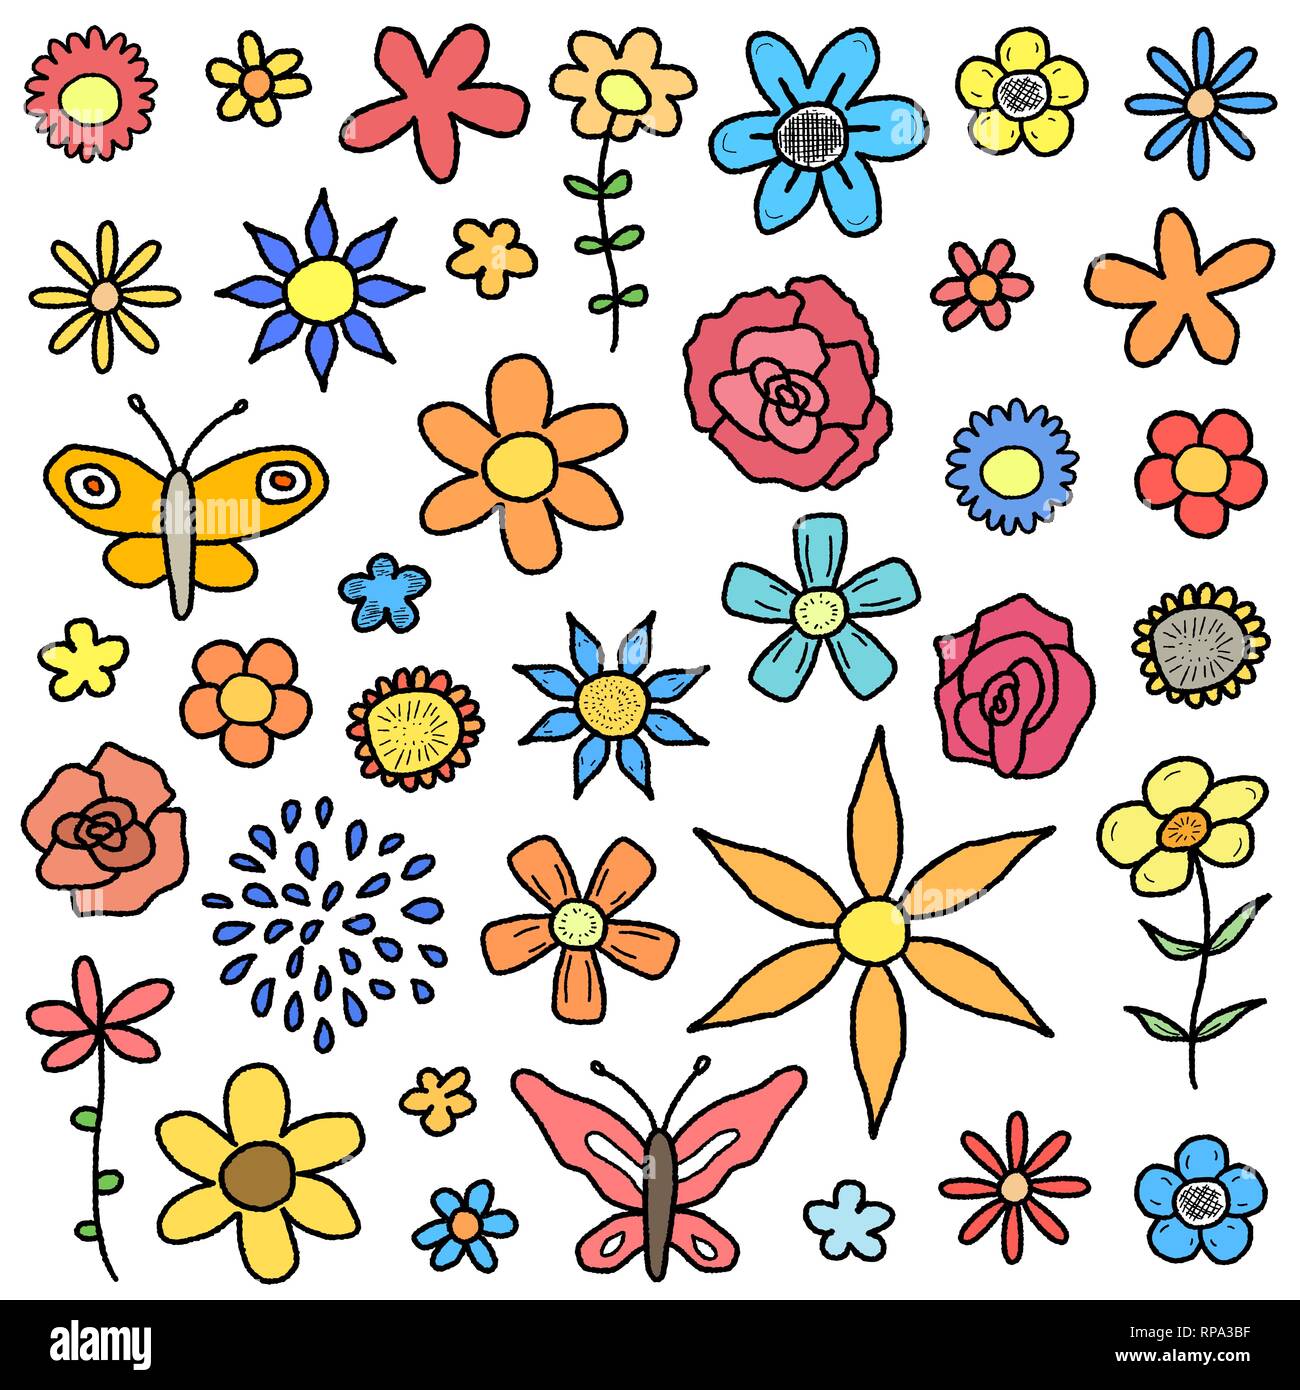 Doodle illustration collection with various flowers, leaves and butterflies. Floral scribble set. Stock Vector